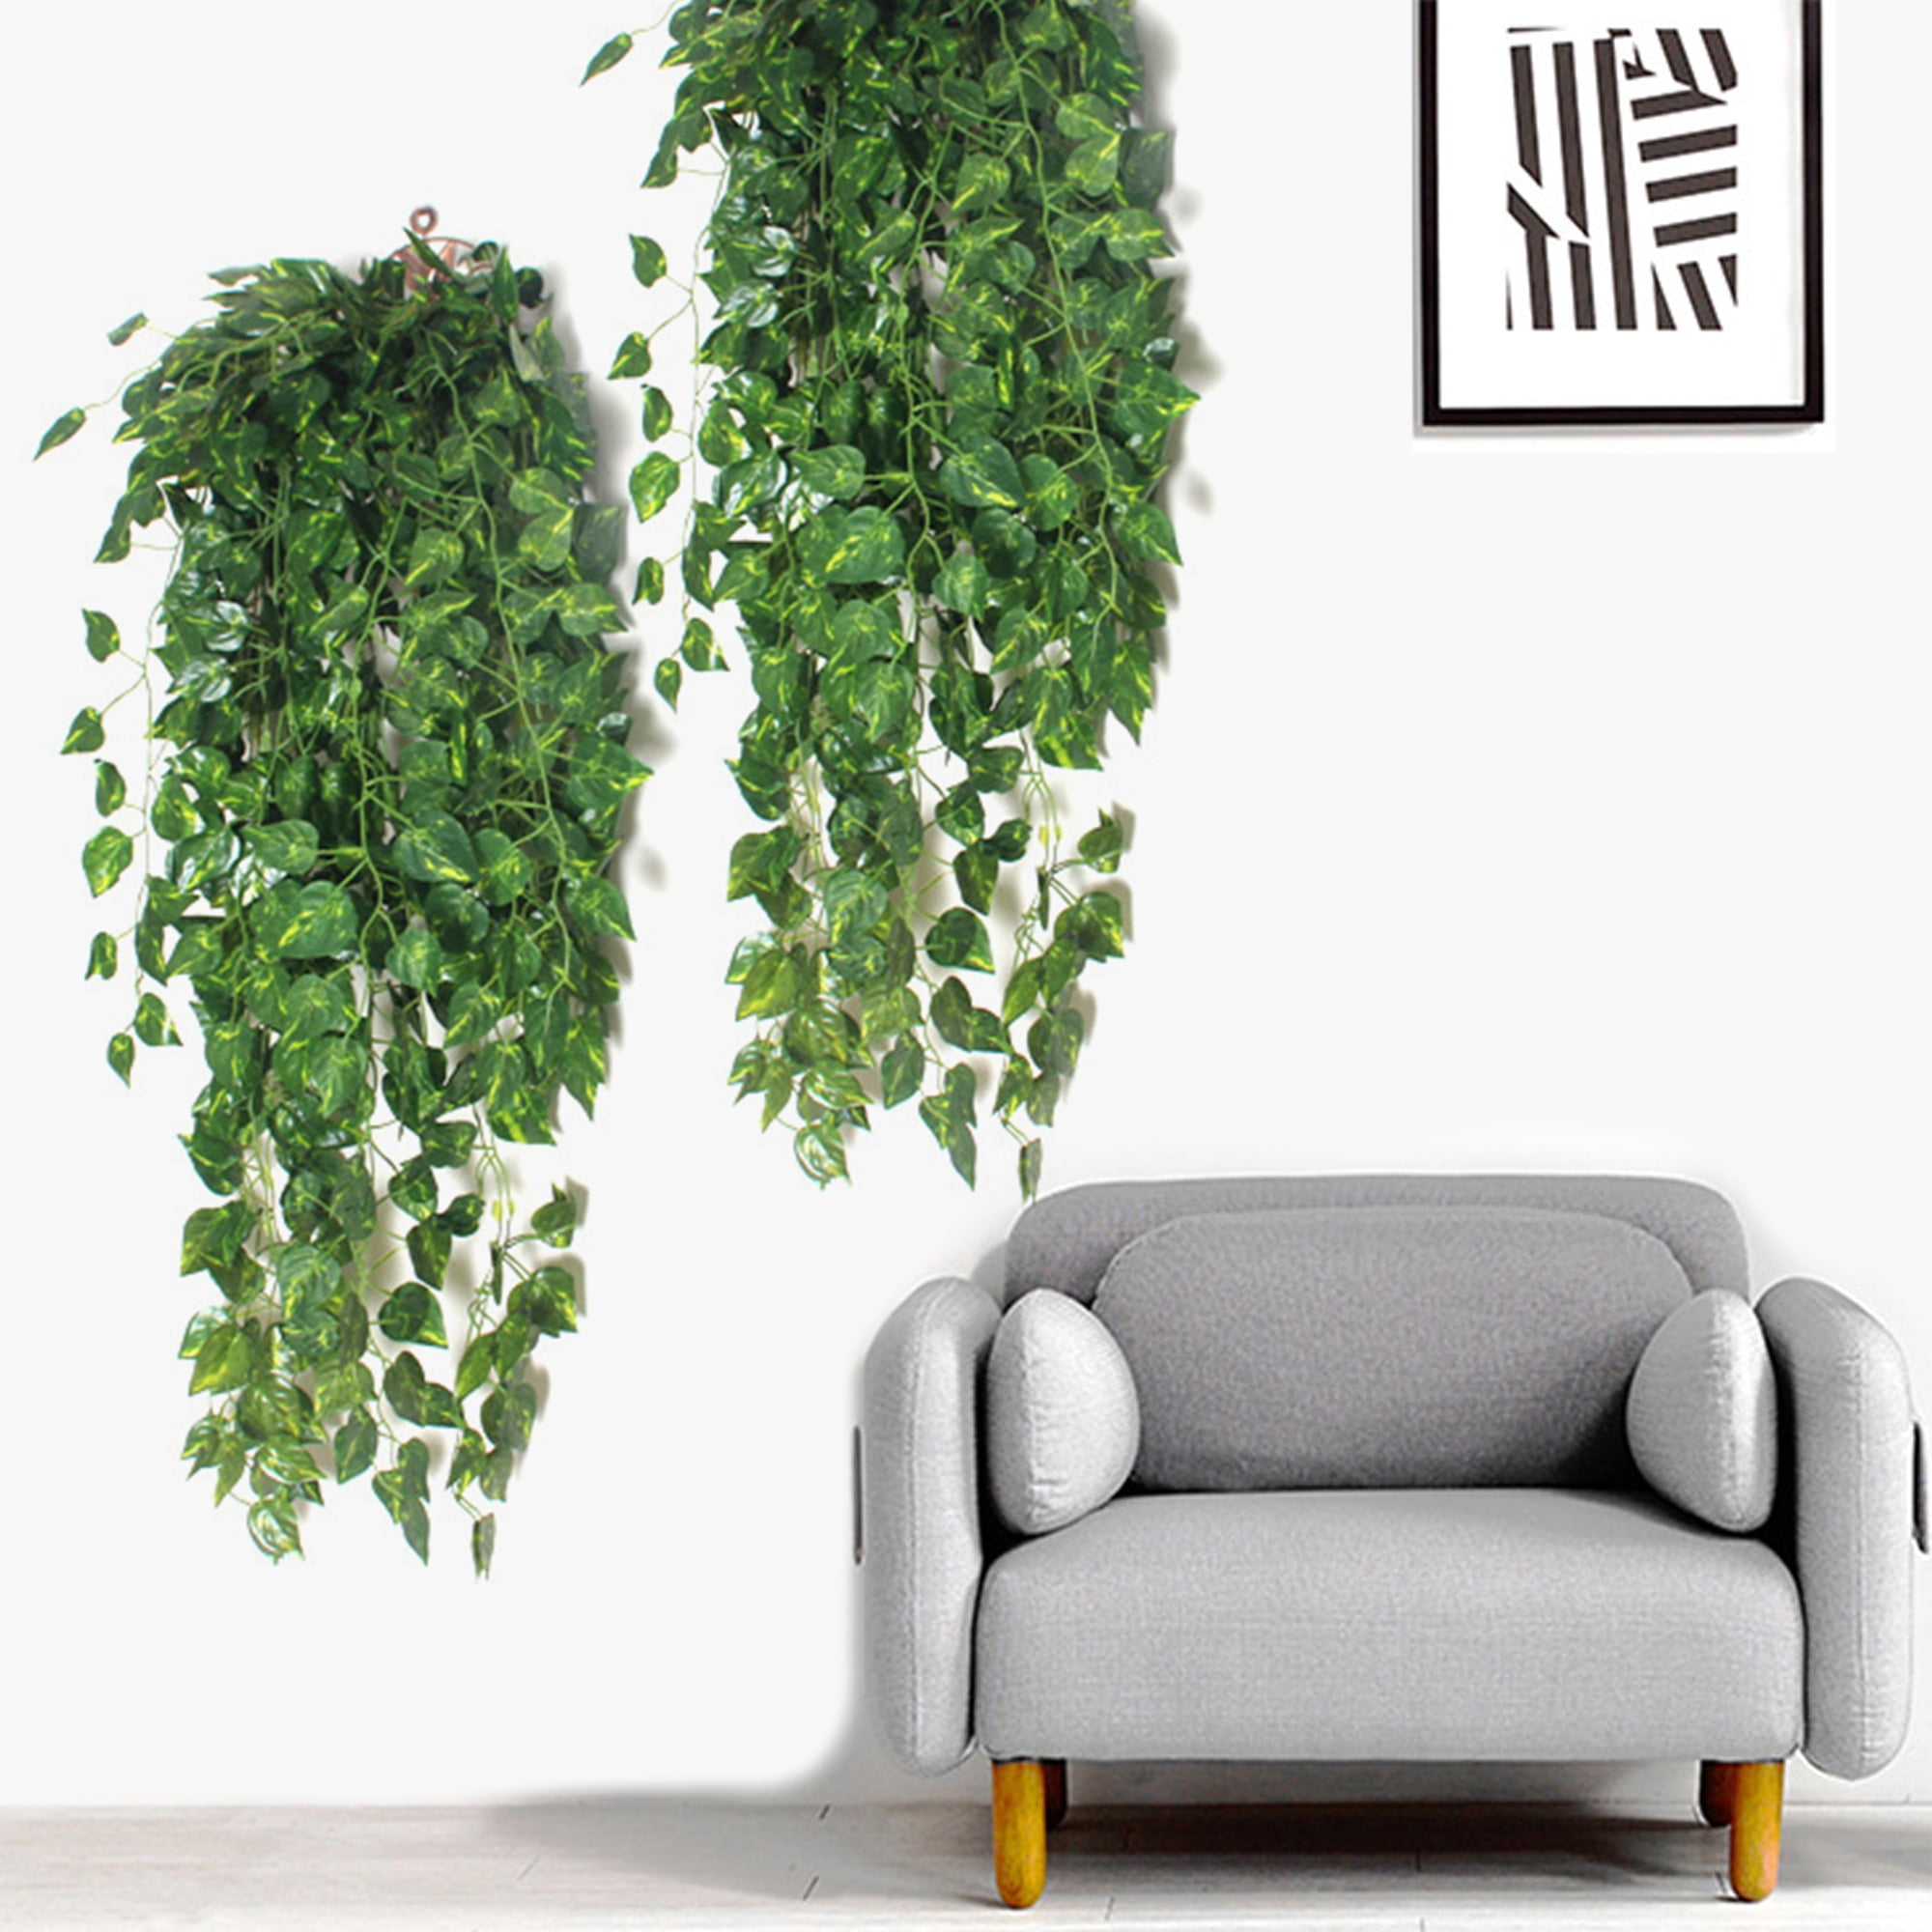 Sunjoy Tech Artificial Wall Hanging Plants, Artificial Ivy Osier Rattans  Fake Hanging Vine Plants Decor Plastic Bracketplant Greenery for Home Wall